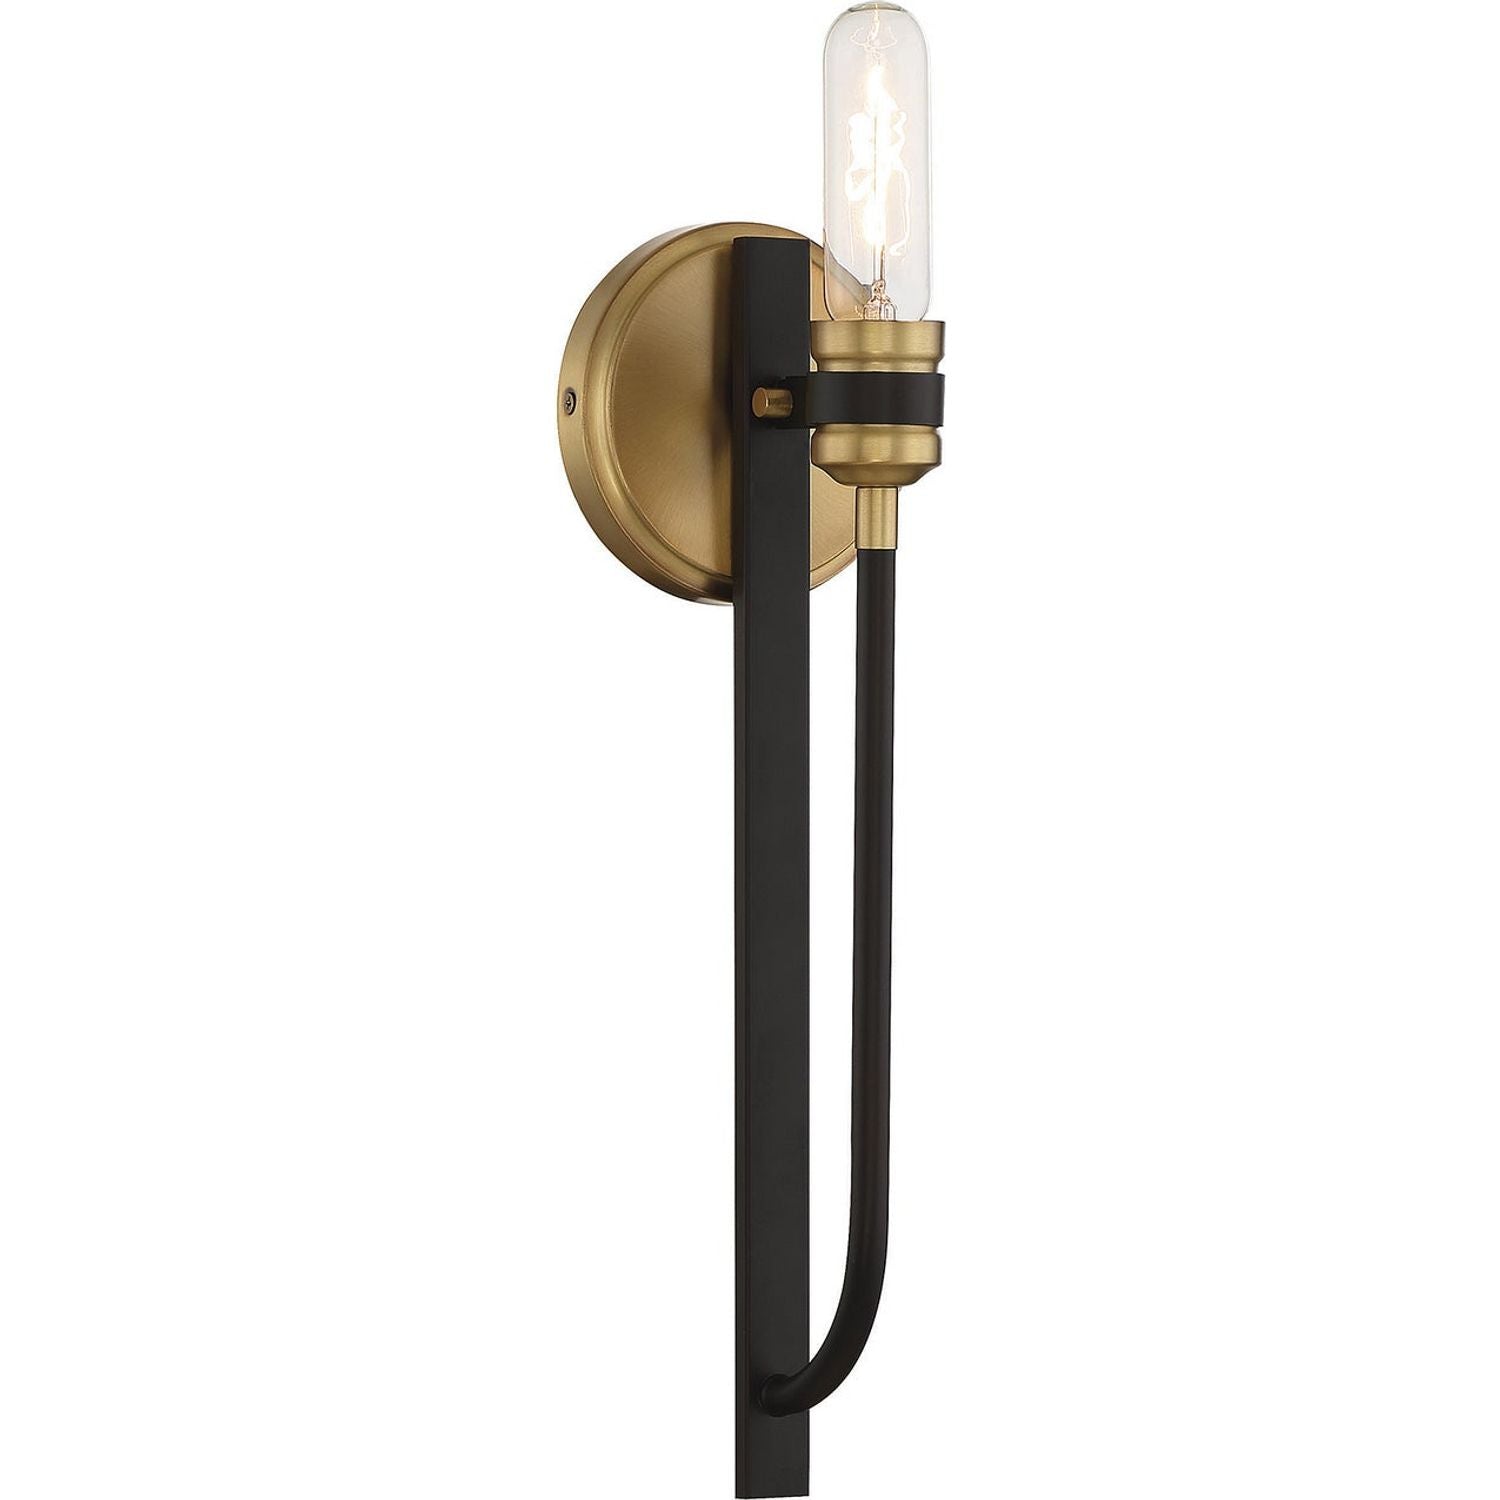 Savoy House - 9-1918-1-77 - One Light Wall Sconce - Kenyon - Bronze with Brass Accents